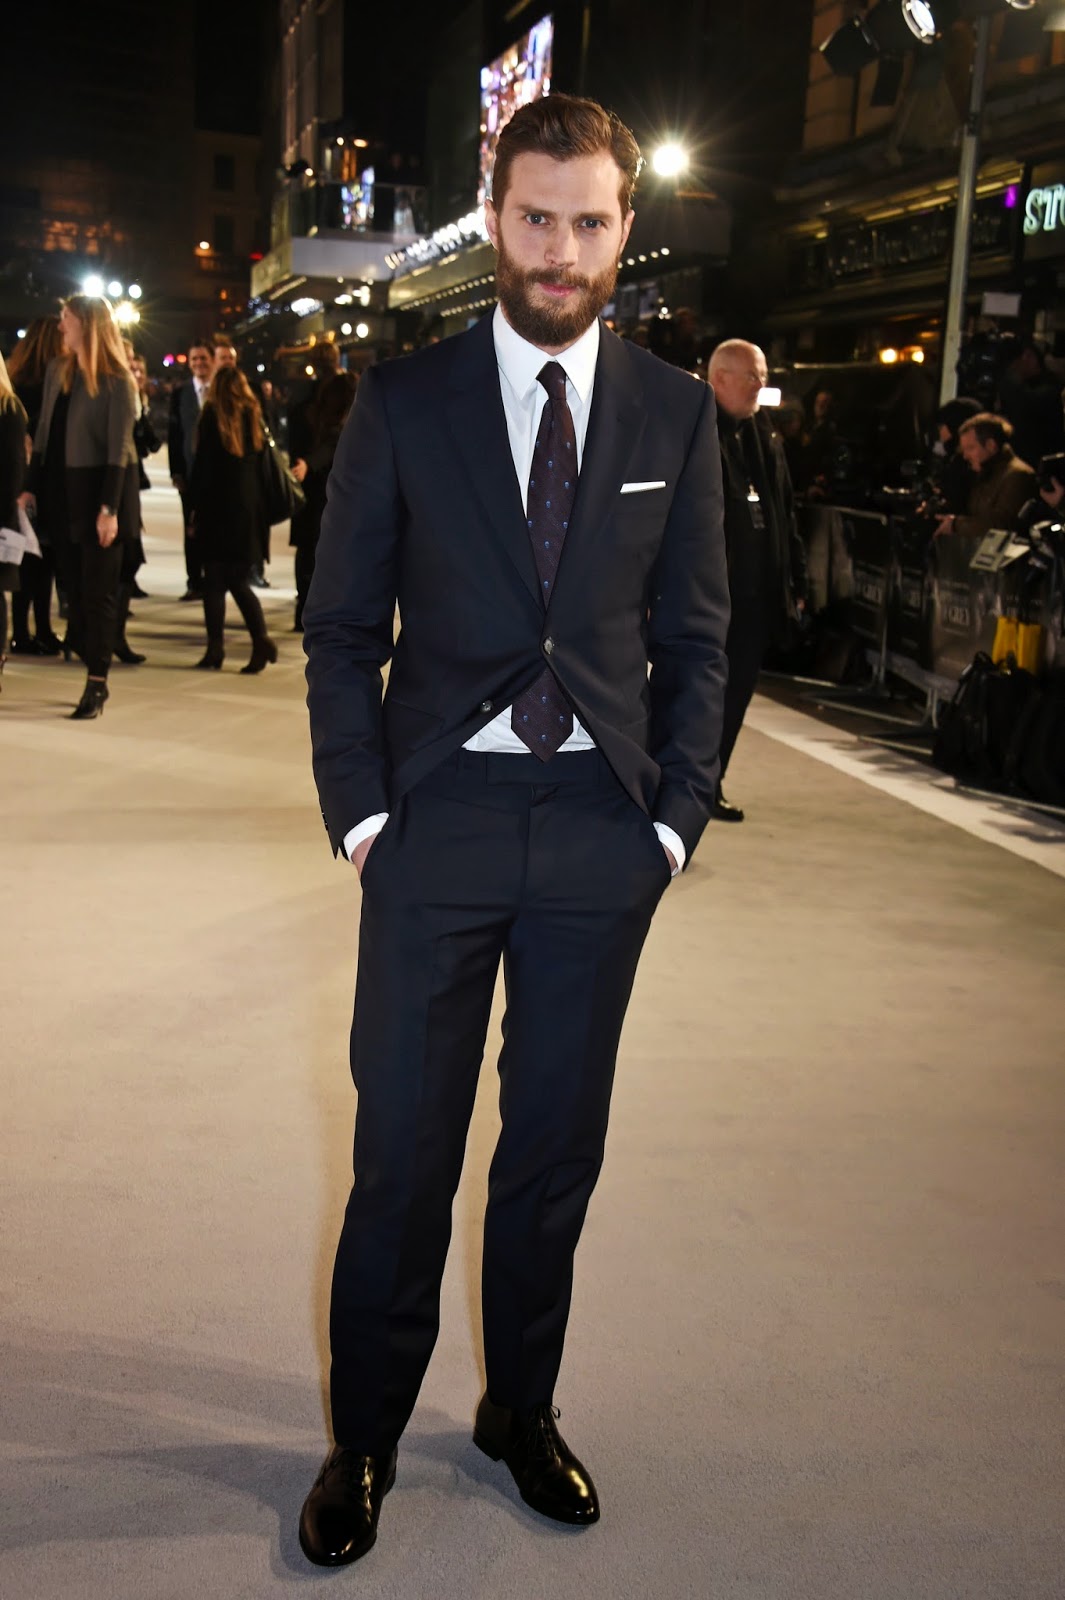 Updates on all things FIFTY!: PICTURES: Jamie Dornan on the red carpet ...